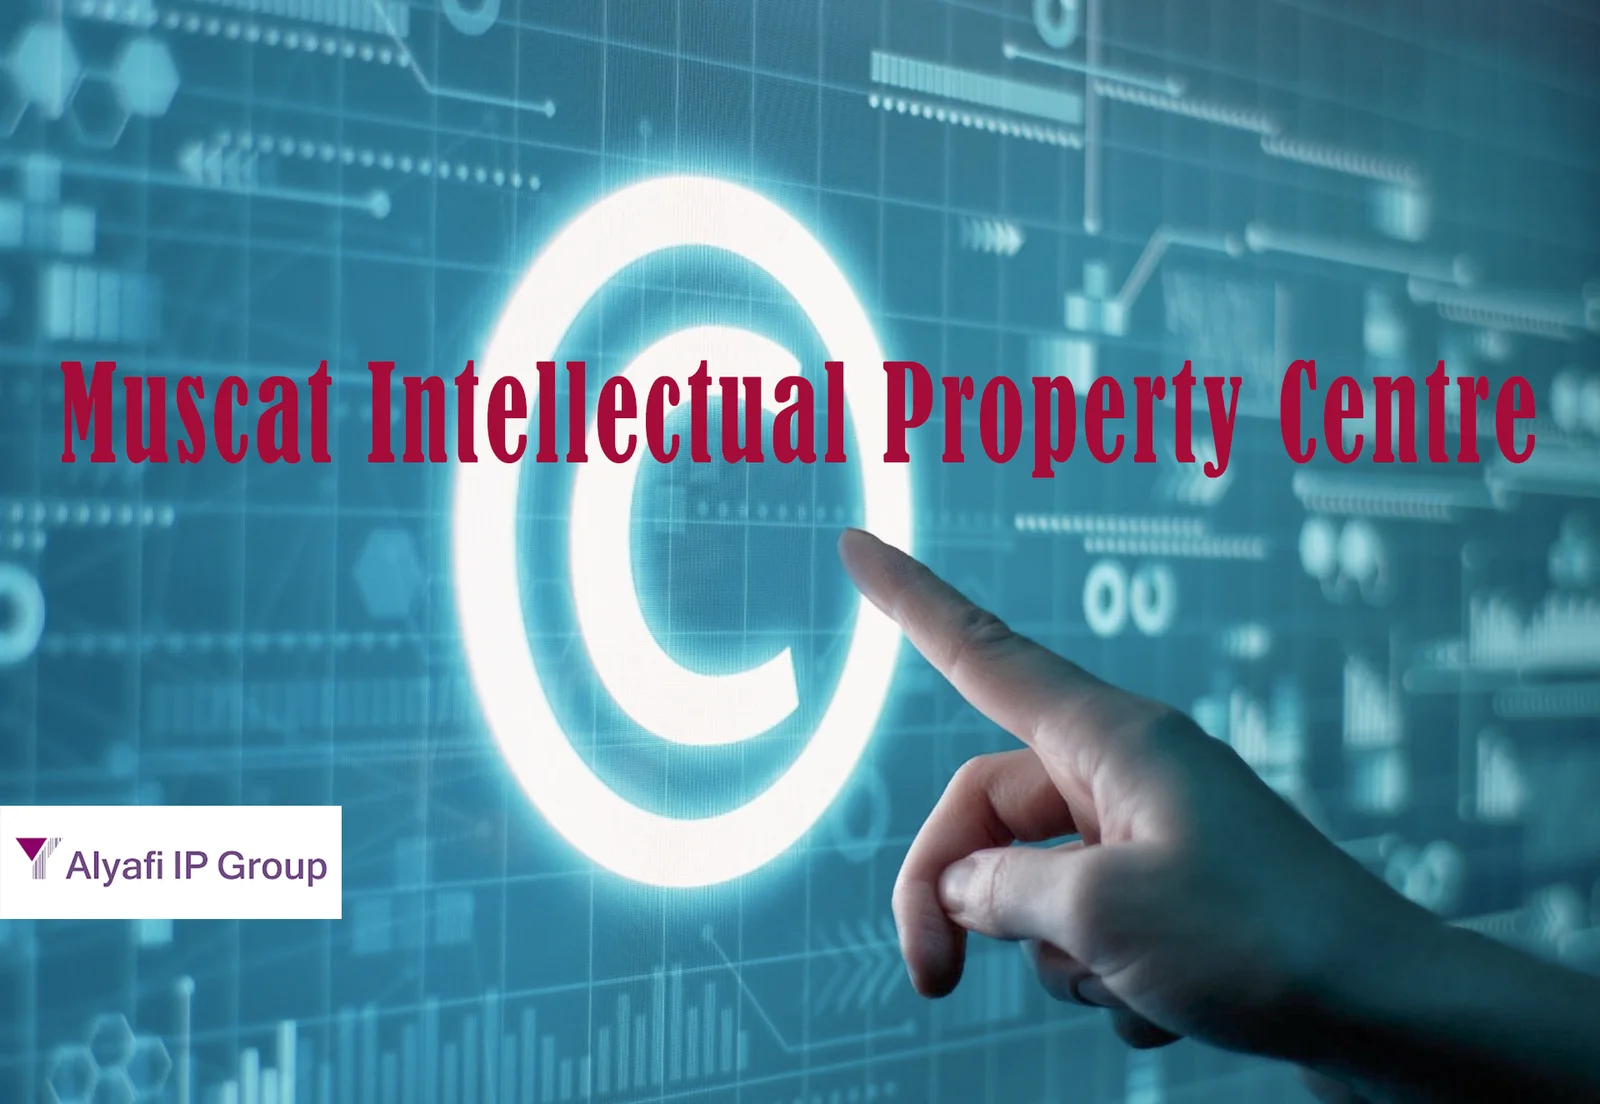 Muscat-Intellectual-Property-Centre